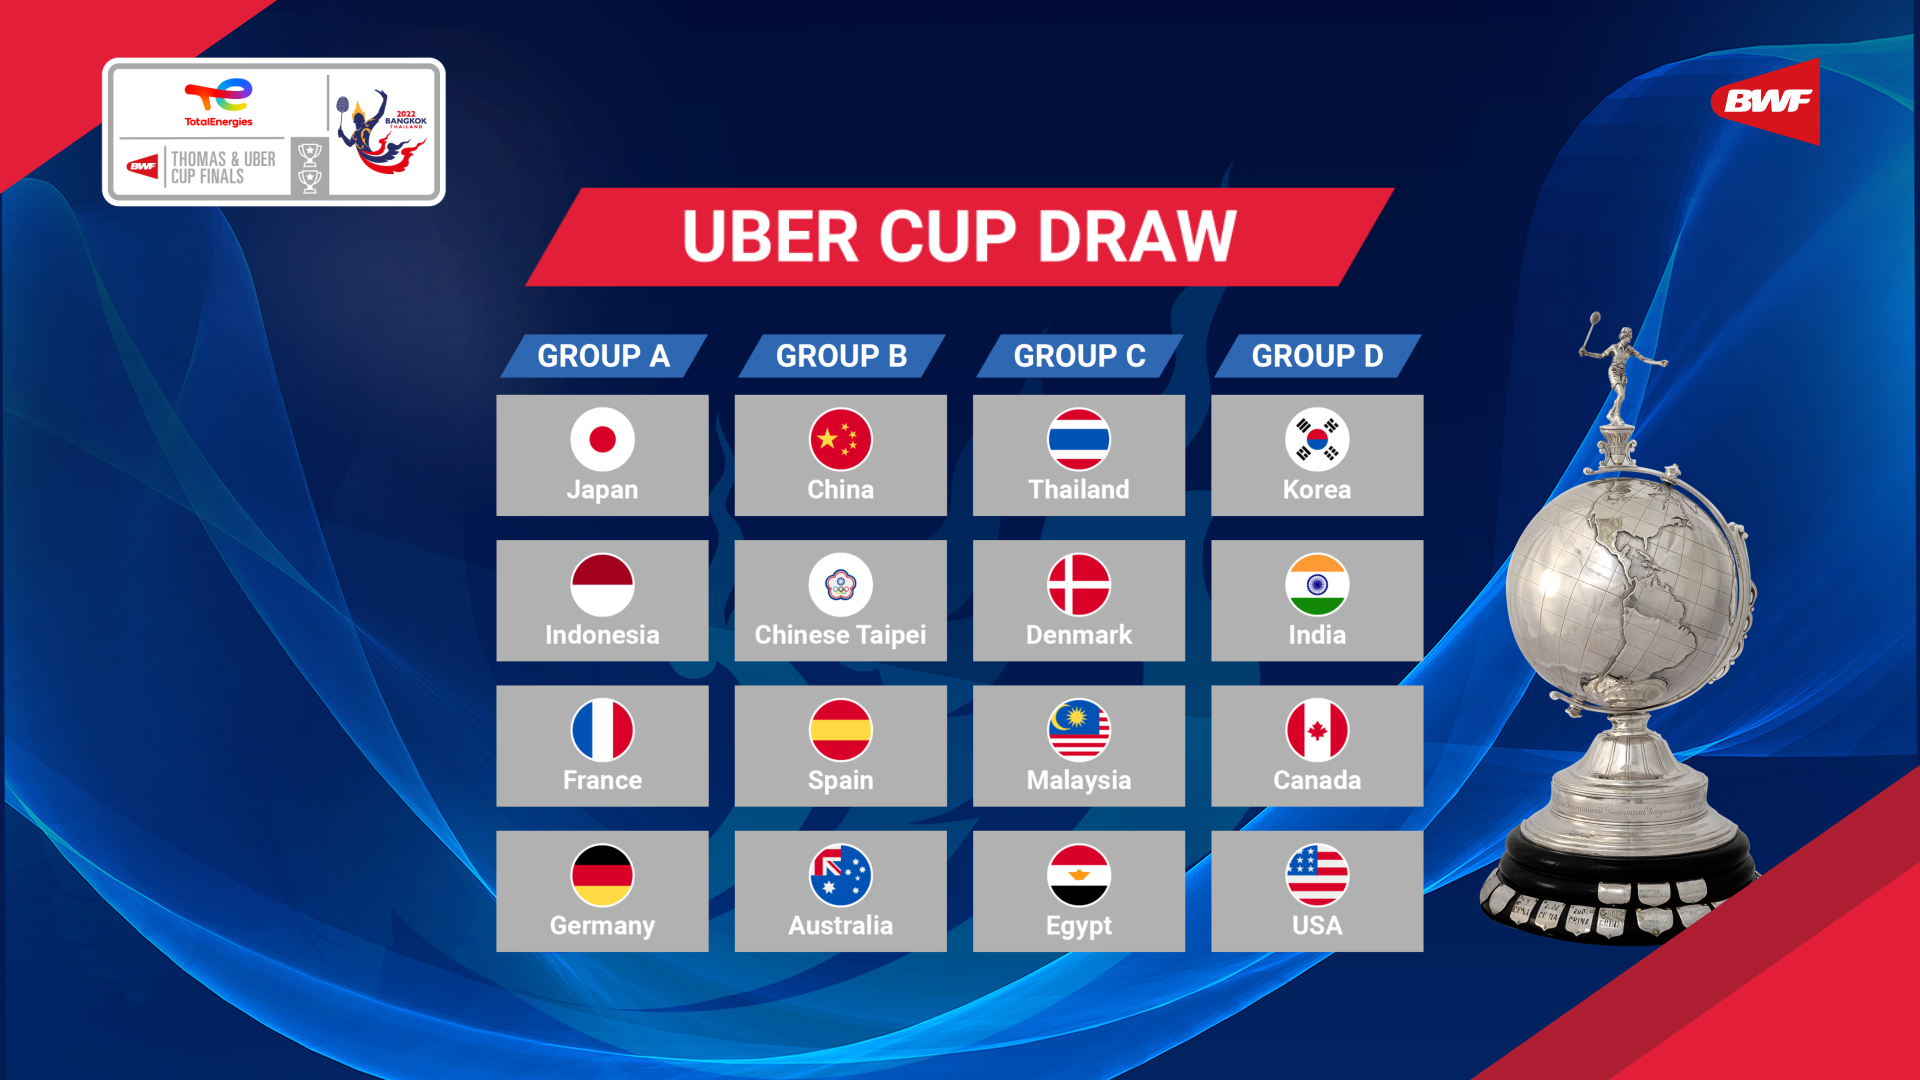 Uber-Cup-2022-Draw-Results.jpg